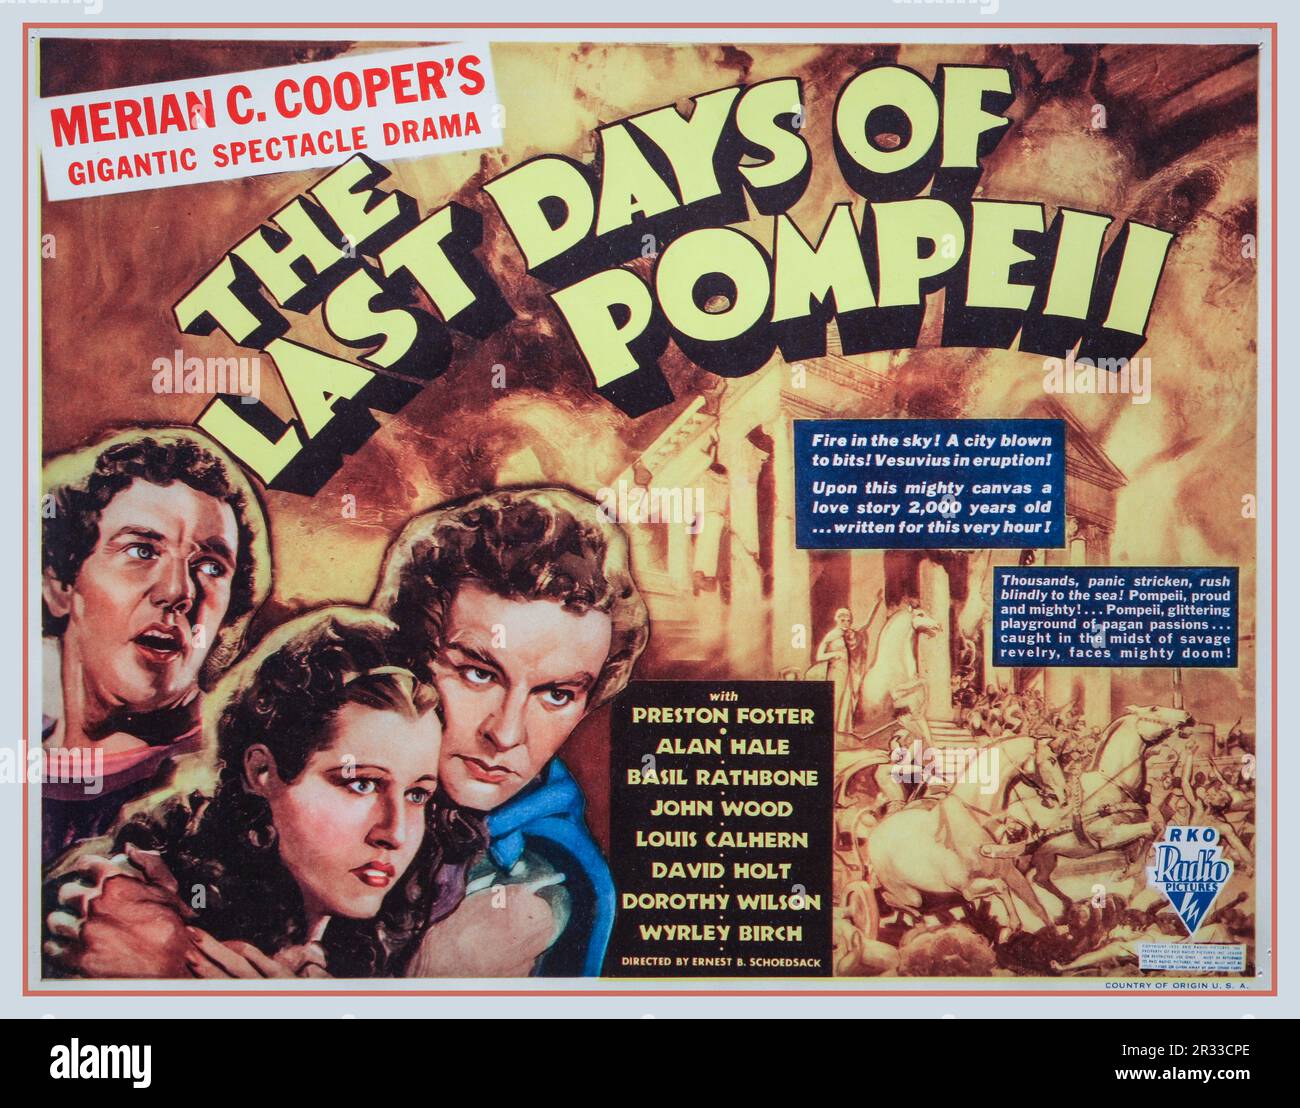 LAST DAYS OF POMPEII Vintage Movie Film Poster The Last Days of Pompeii (1935)  an RKO Radio Pictures film starring Preston Foster and directed by Ernest B. Schoedsack and Merian C. Cooper, Directed byErnest B. Schoedsack Merian C. Cooper Written byRuth Rose Story by James Ashmore Creelman[1] Based on The Last Days of Pompeii by Edward Bulwer-Lytton Produced by Merian C. Cooper Starring Preston Foster Alan Hale Basil Rathbone John Wood David Holt Dorothy Wilson Stock Photo